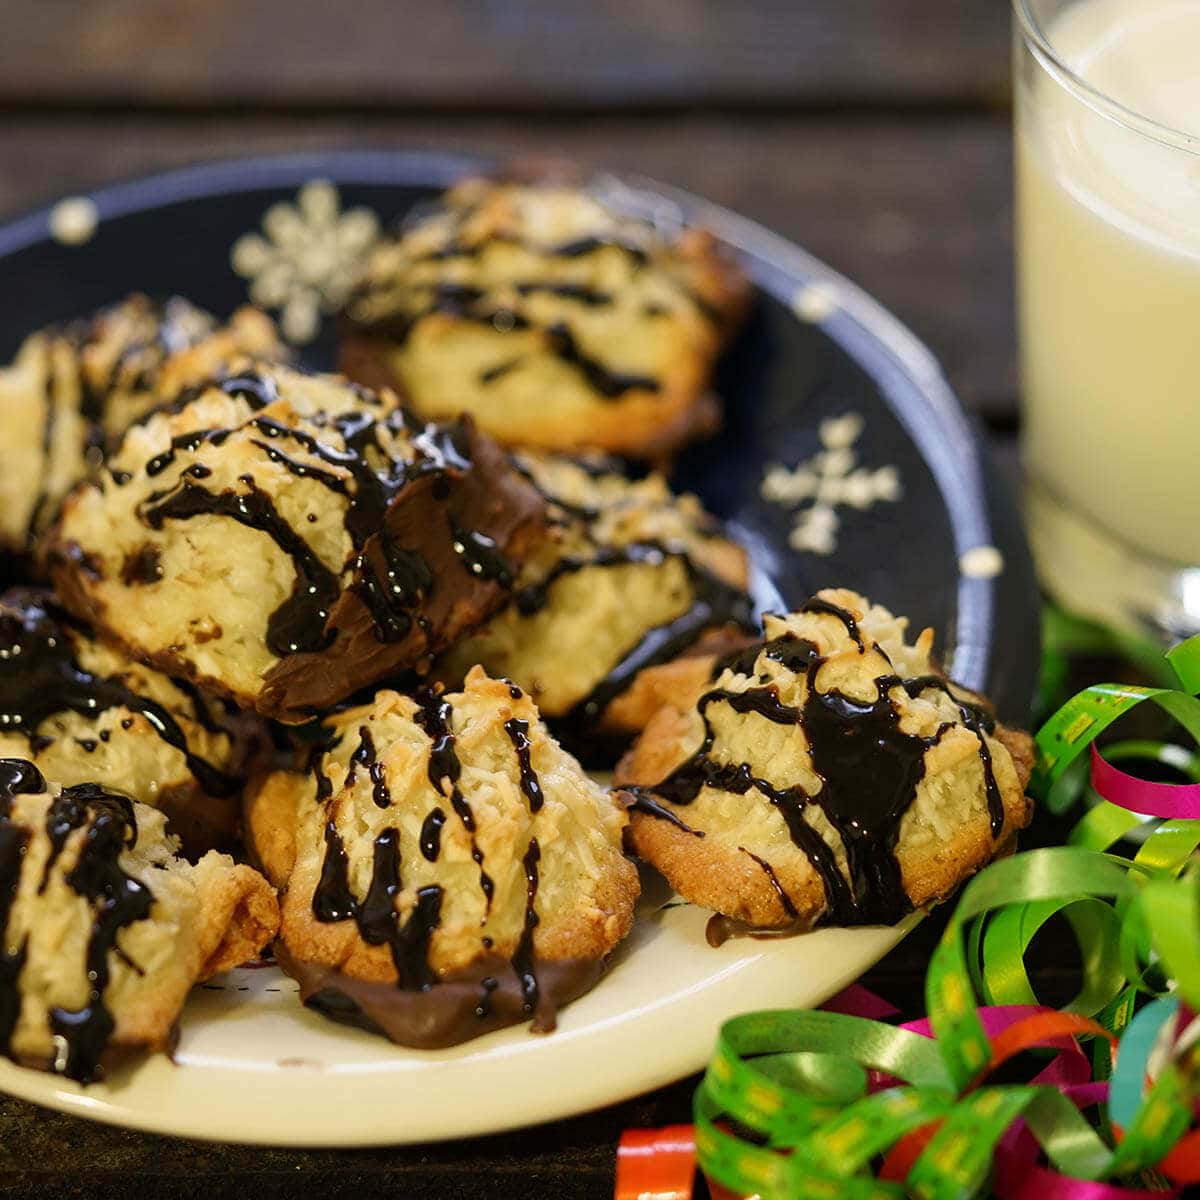 Coconut Macaroons with chocolate drizzle on plate with a glass of milk.